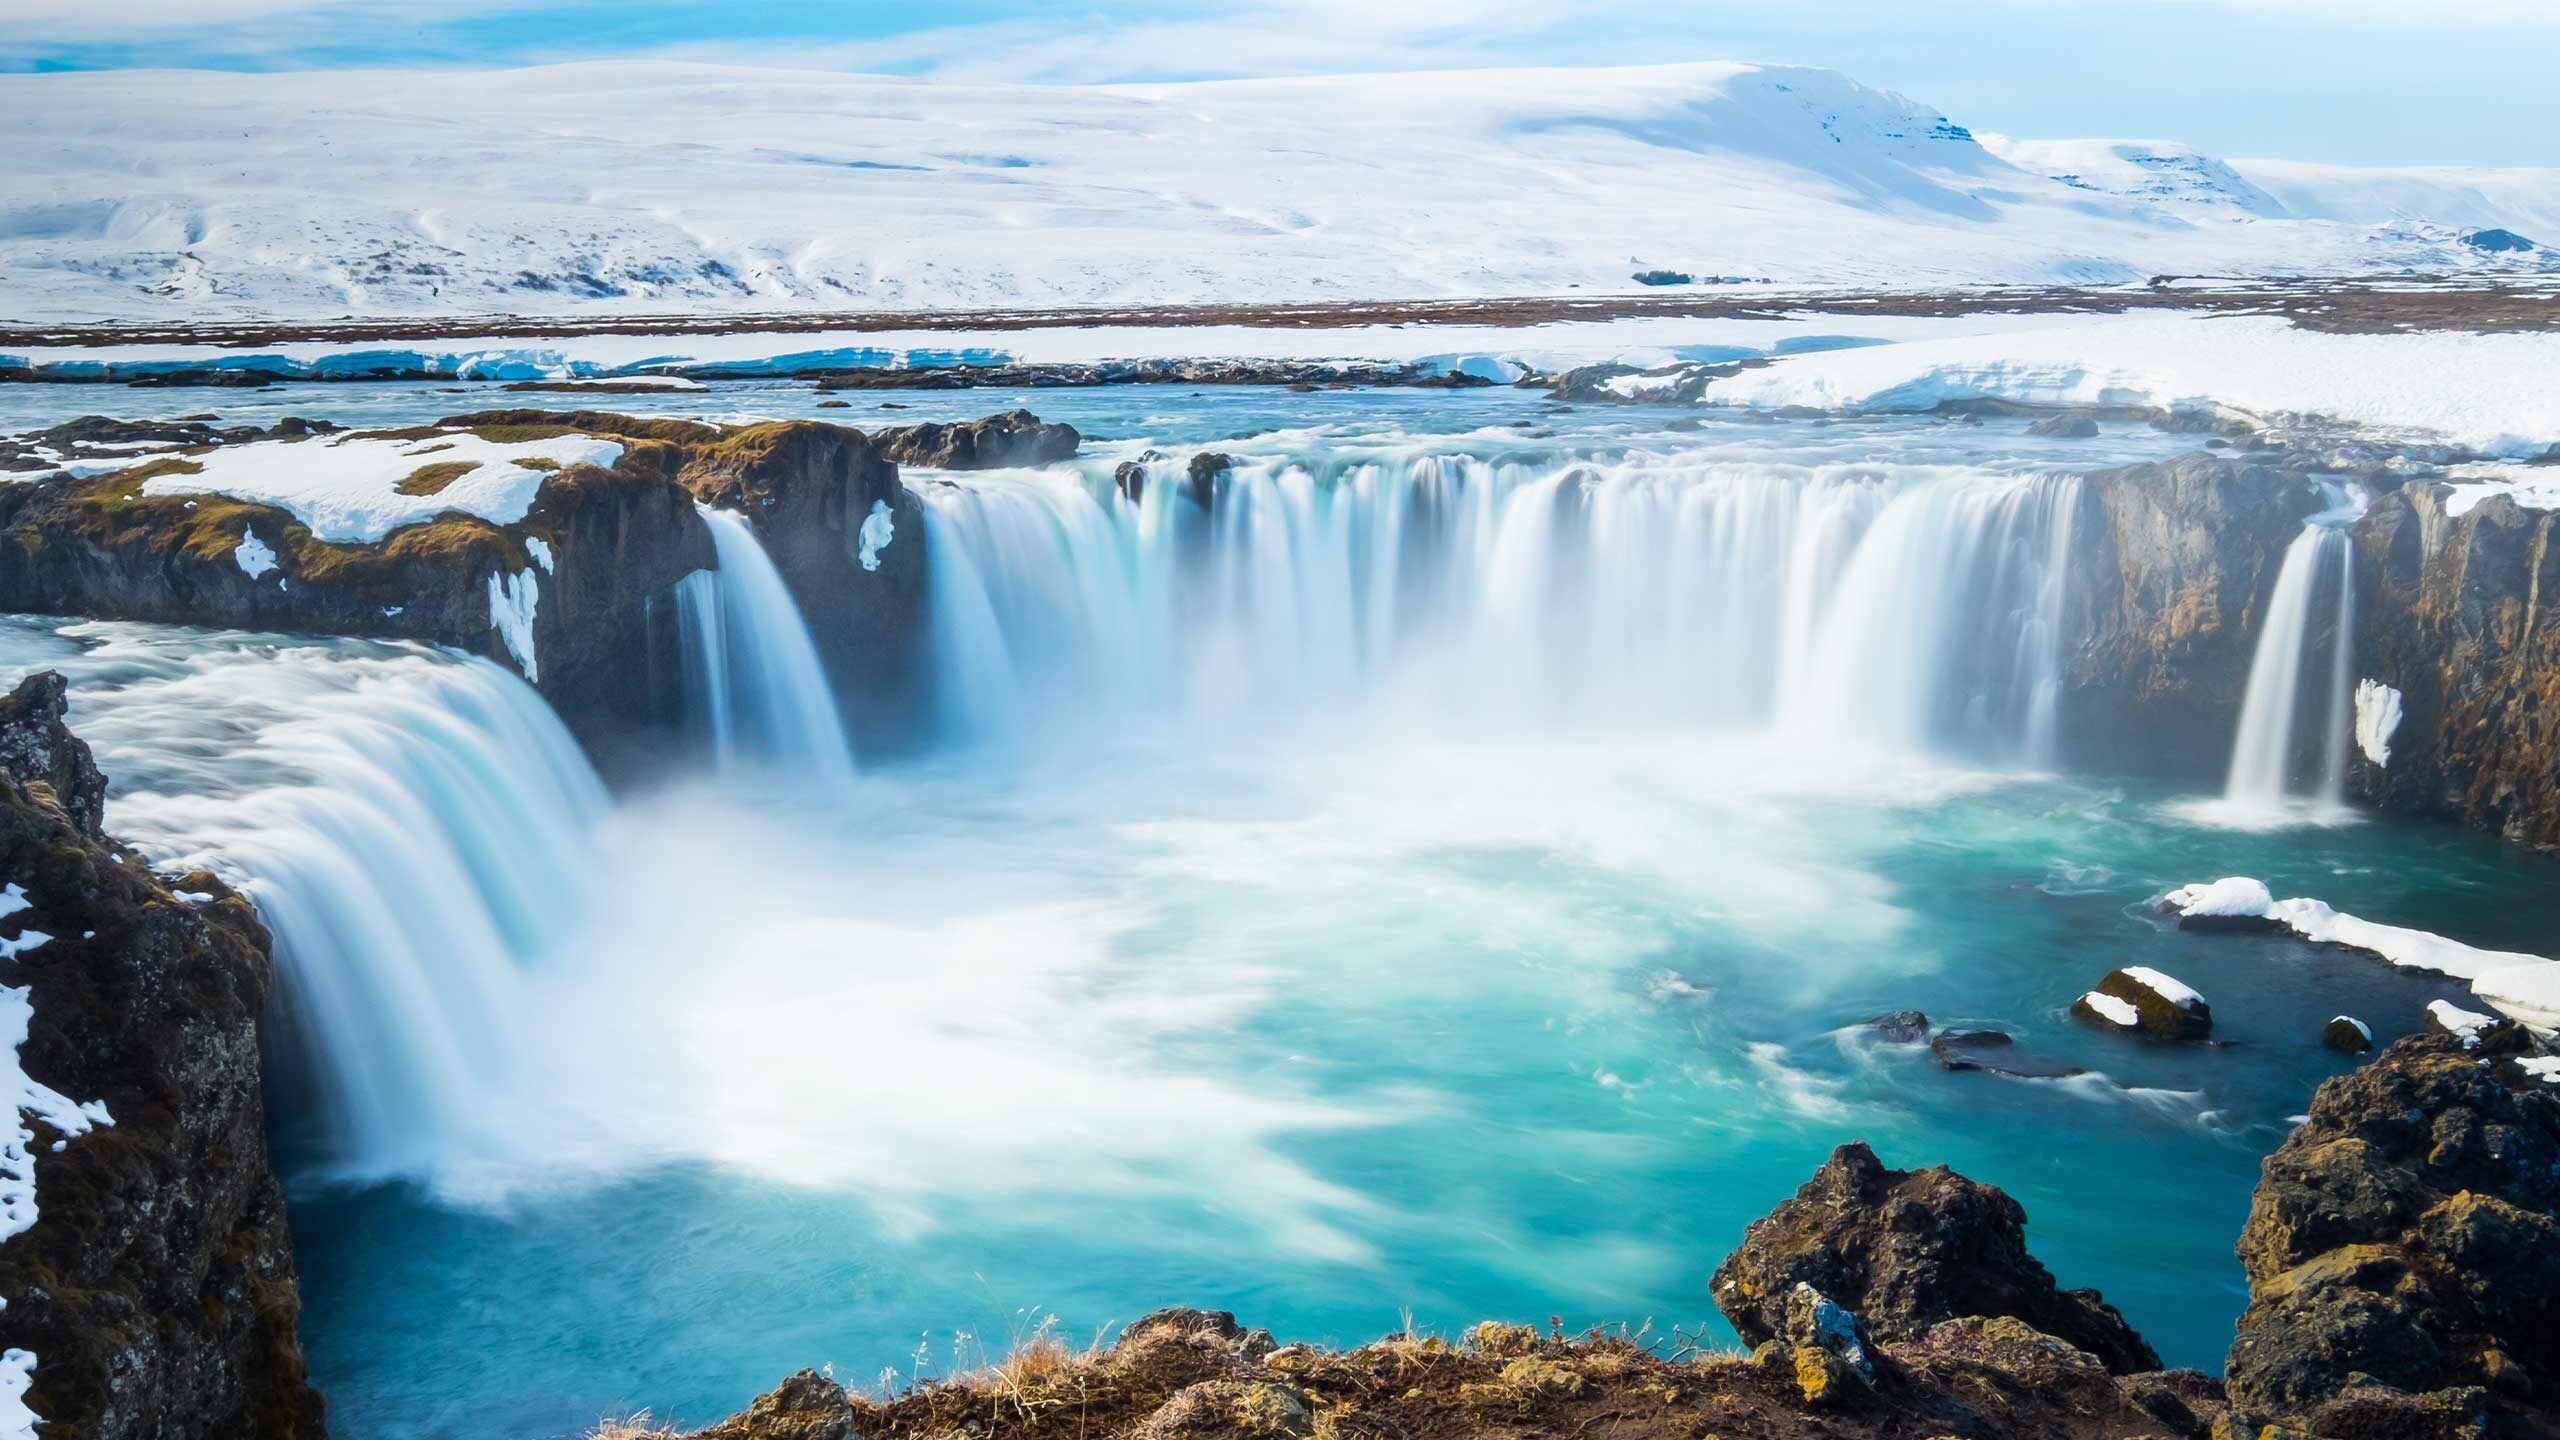 cruises to iceland from us 2023